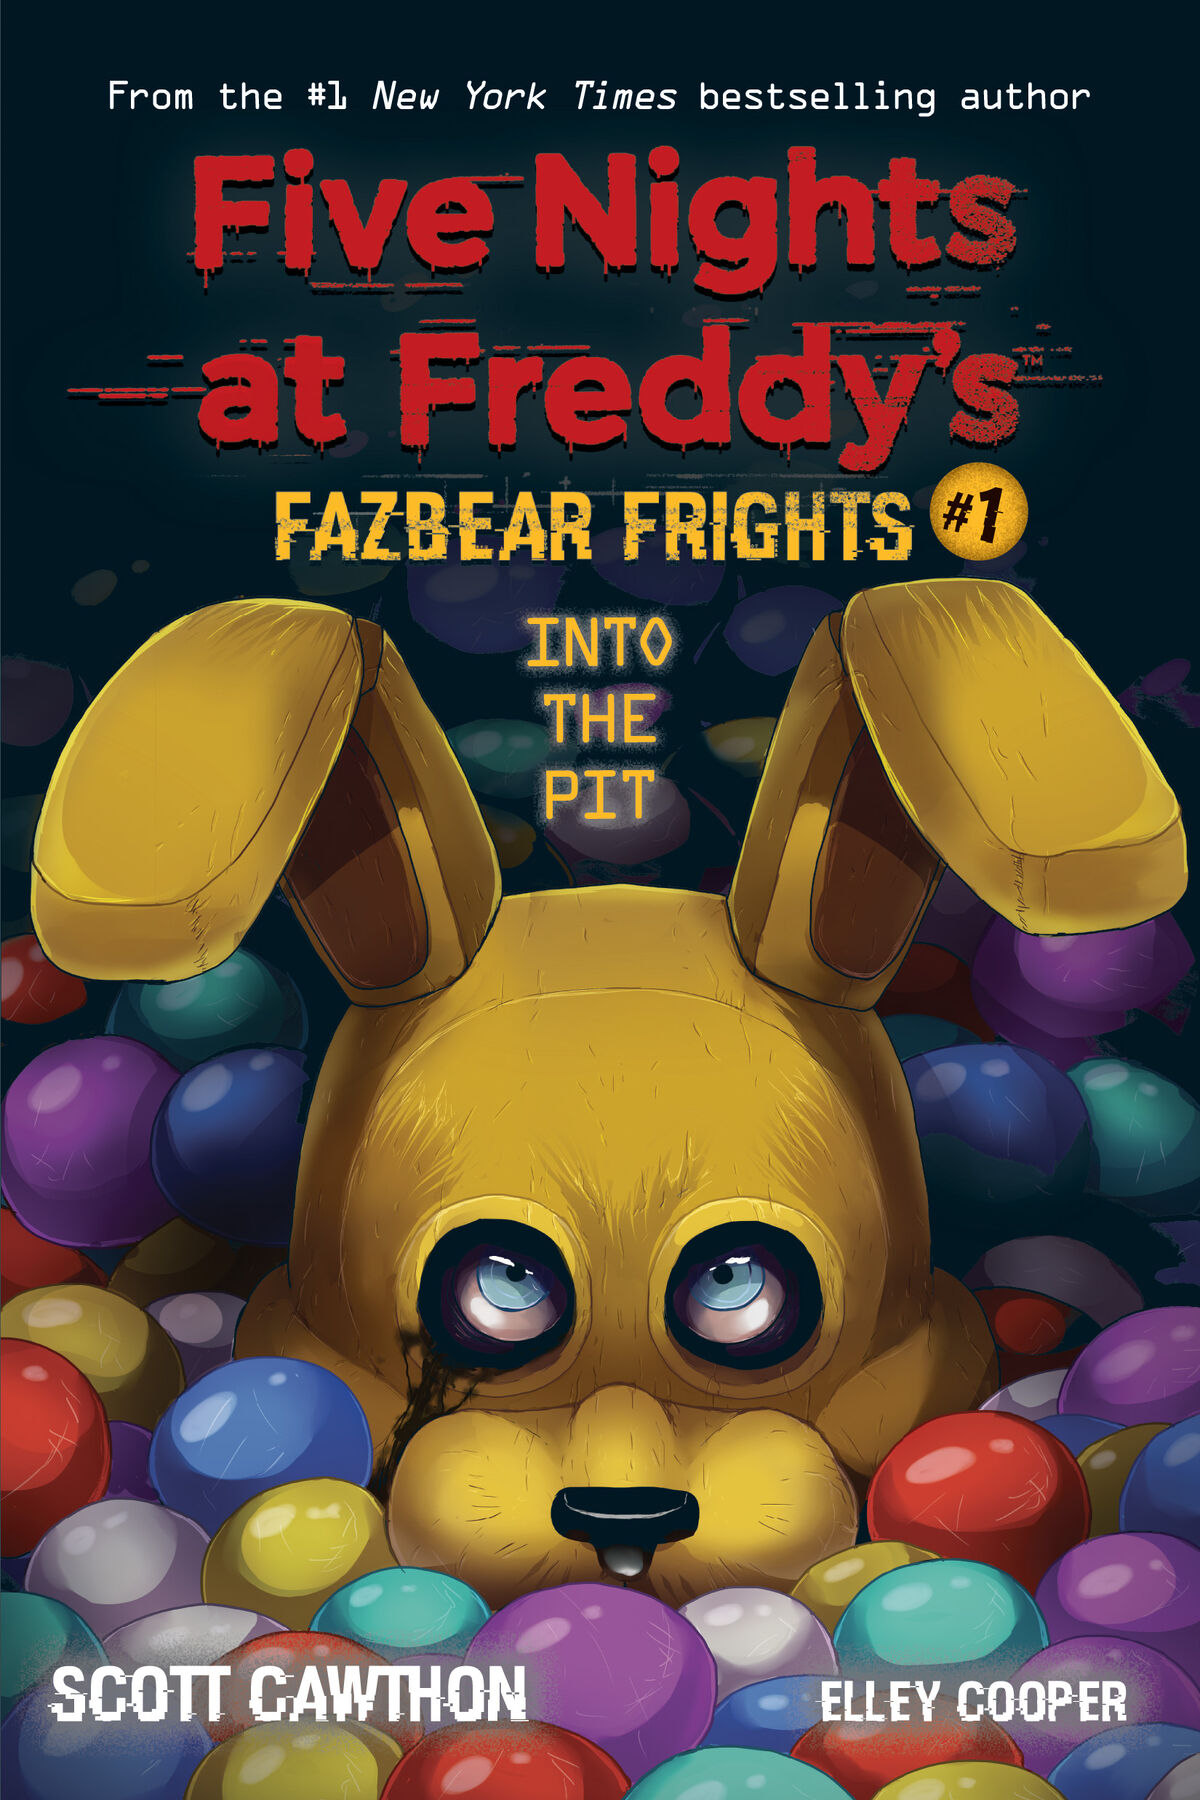 Five Nights at Freddy's™: Fazbear Frights Graphic Novel Collection Vol. 3  (Paperback)